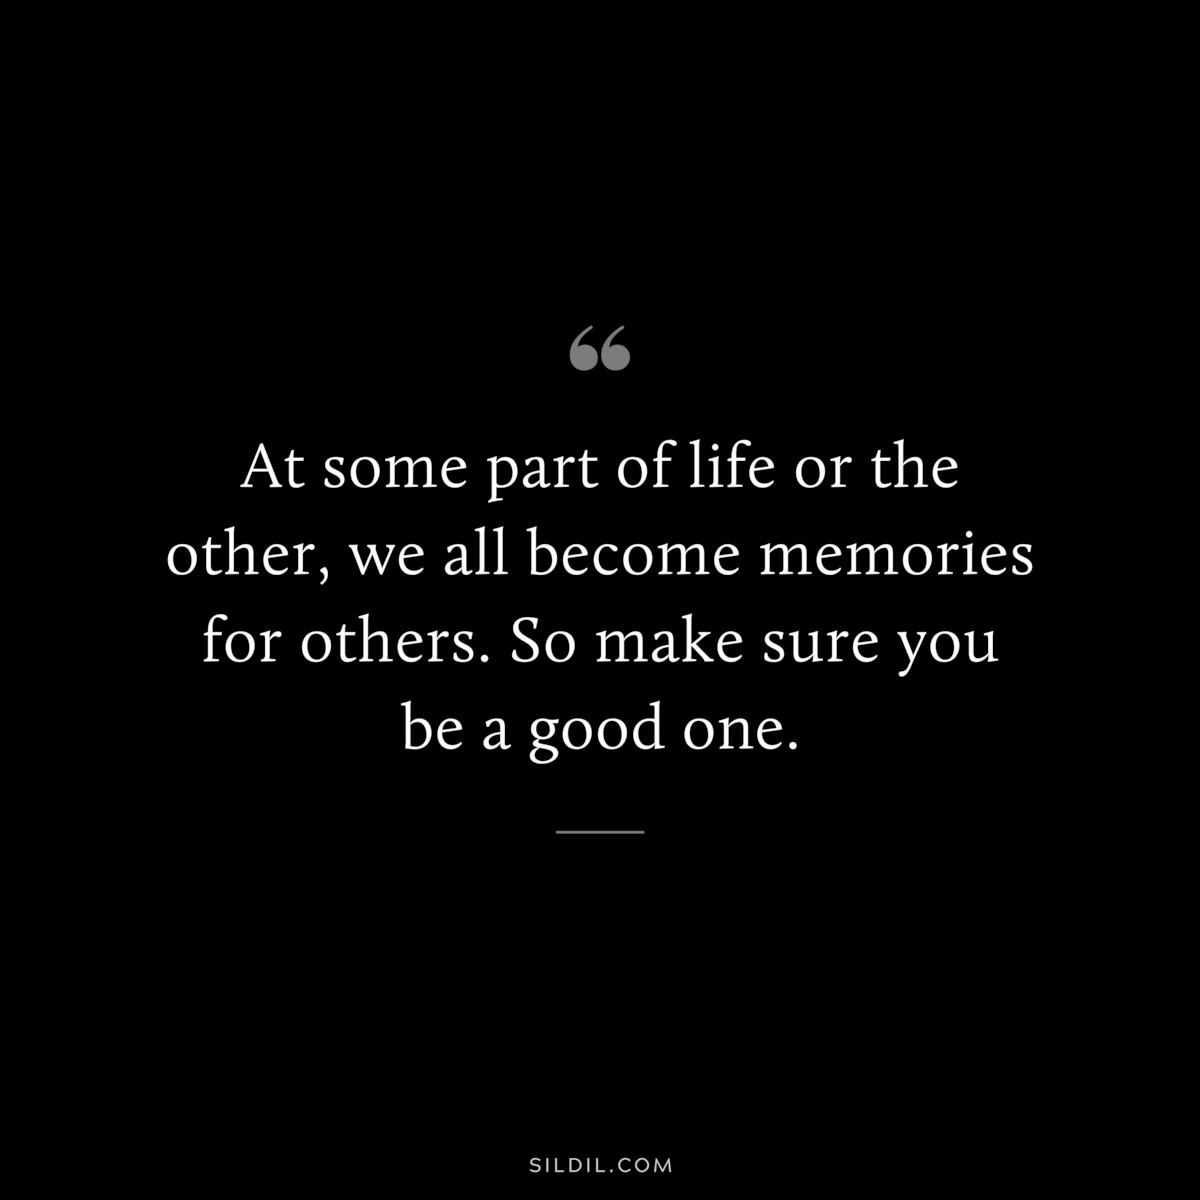 At some part of life or the other, we all become memories for others. So make sure you be a good one.